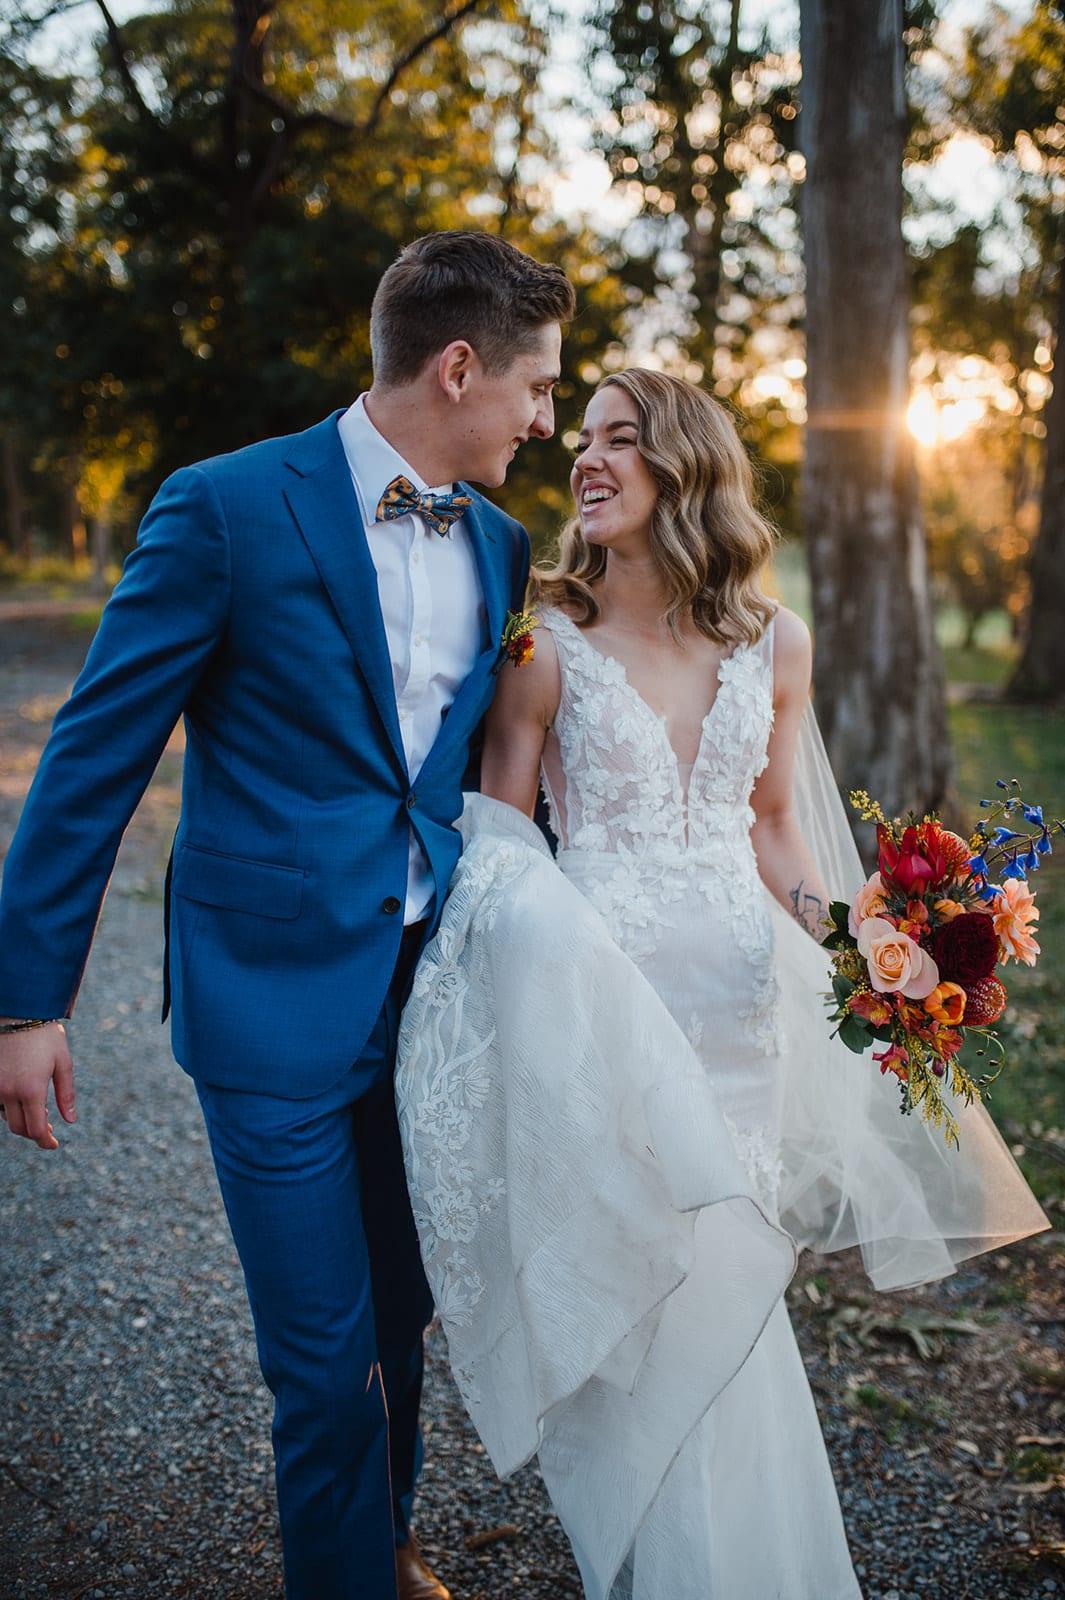 Hannah & Ryan’s Wedding Day - Romantic, Raw & Beautiful - White Lily Couture